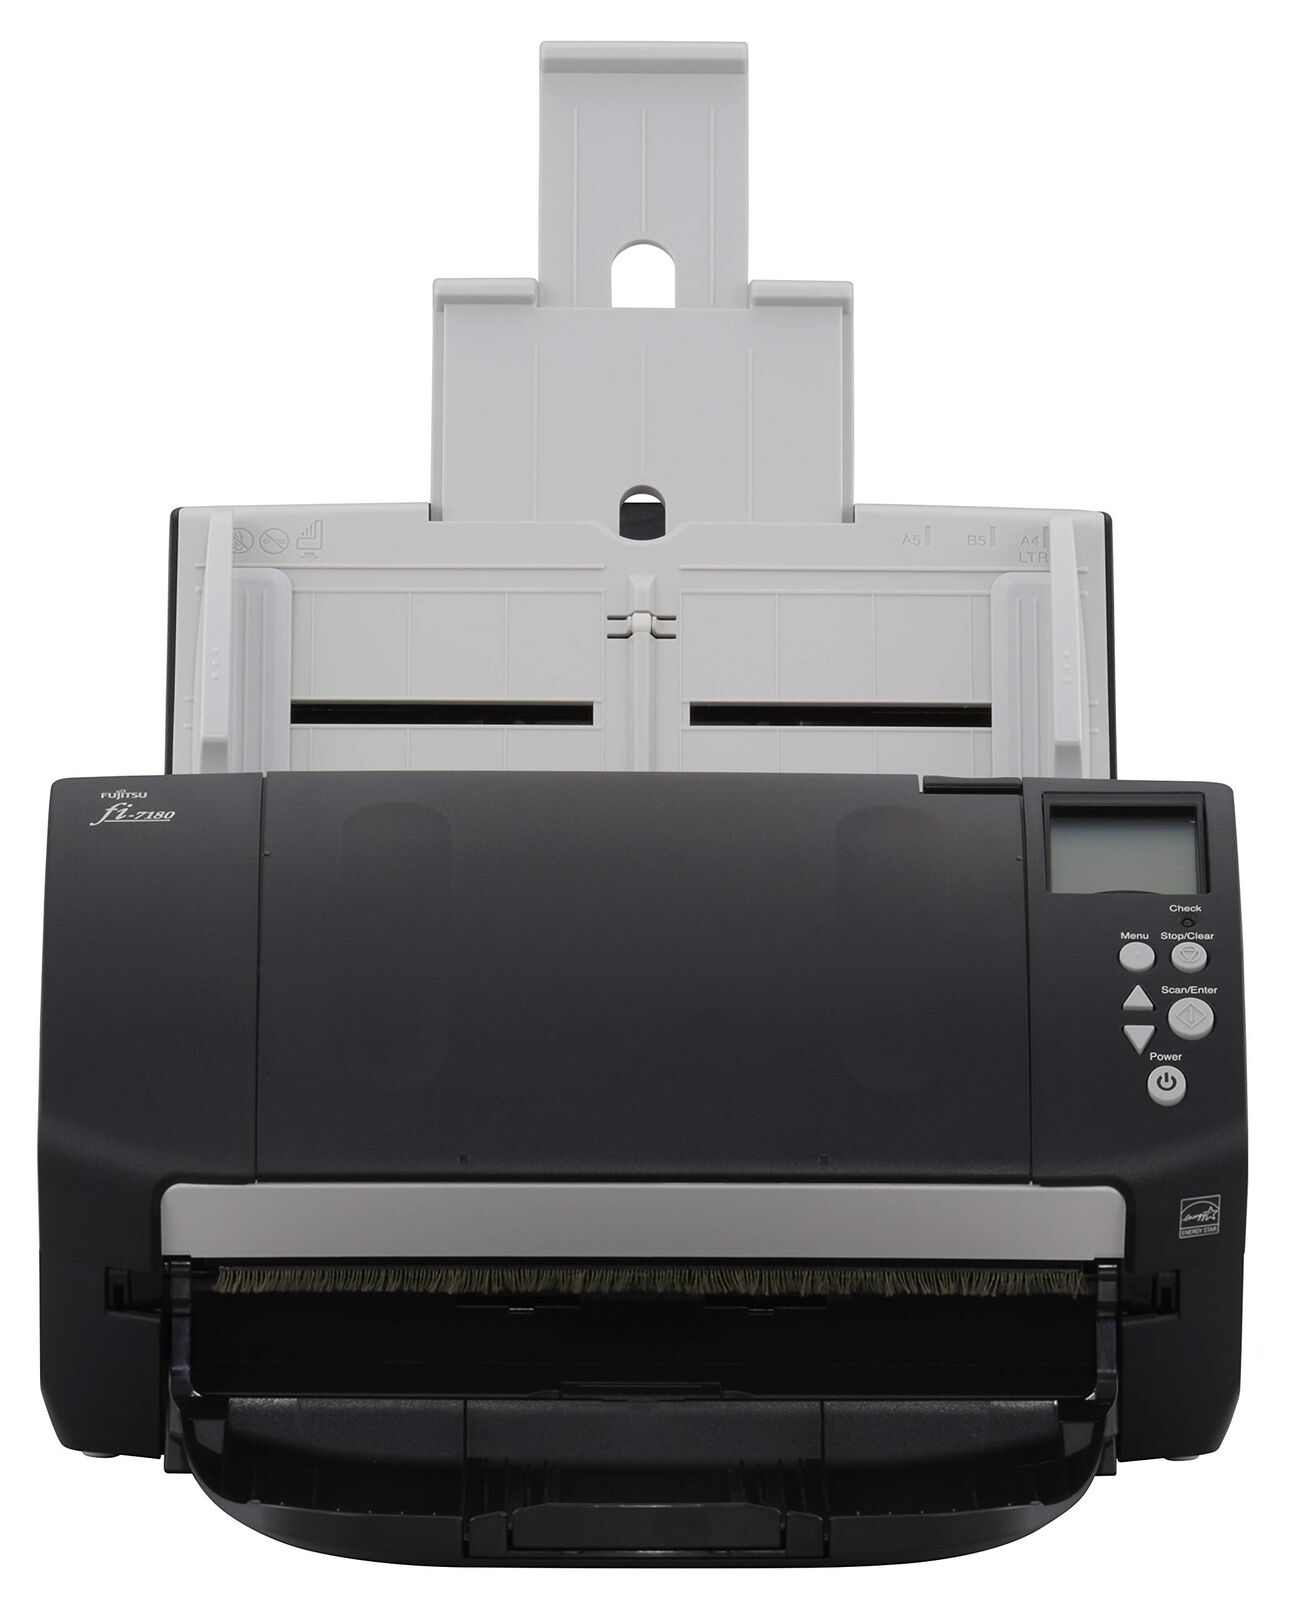 Fujitsu fi-7180 High-Performance Professional Color Duplex Document Scanner with